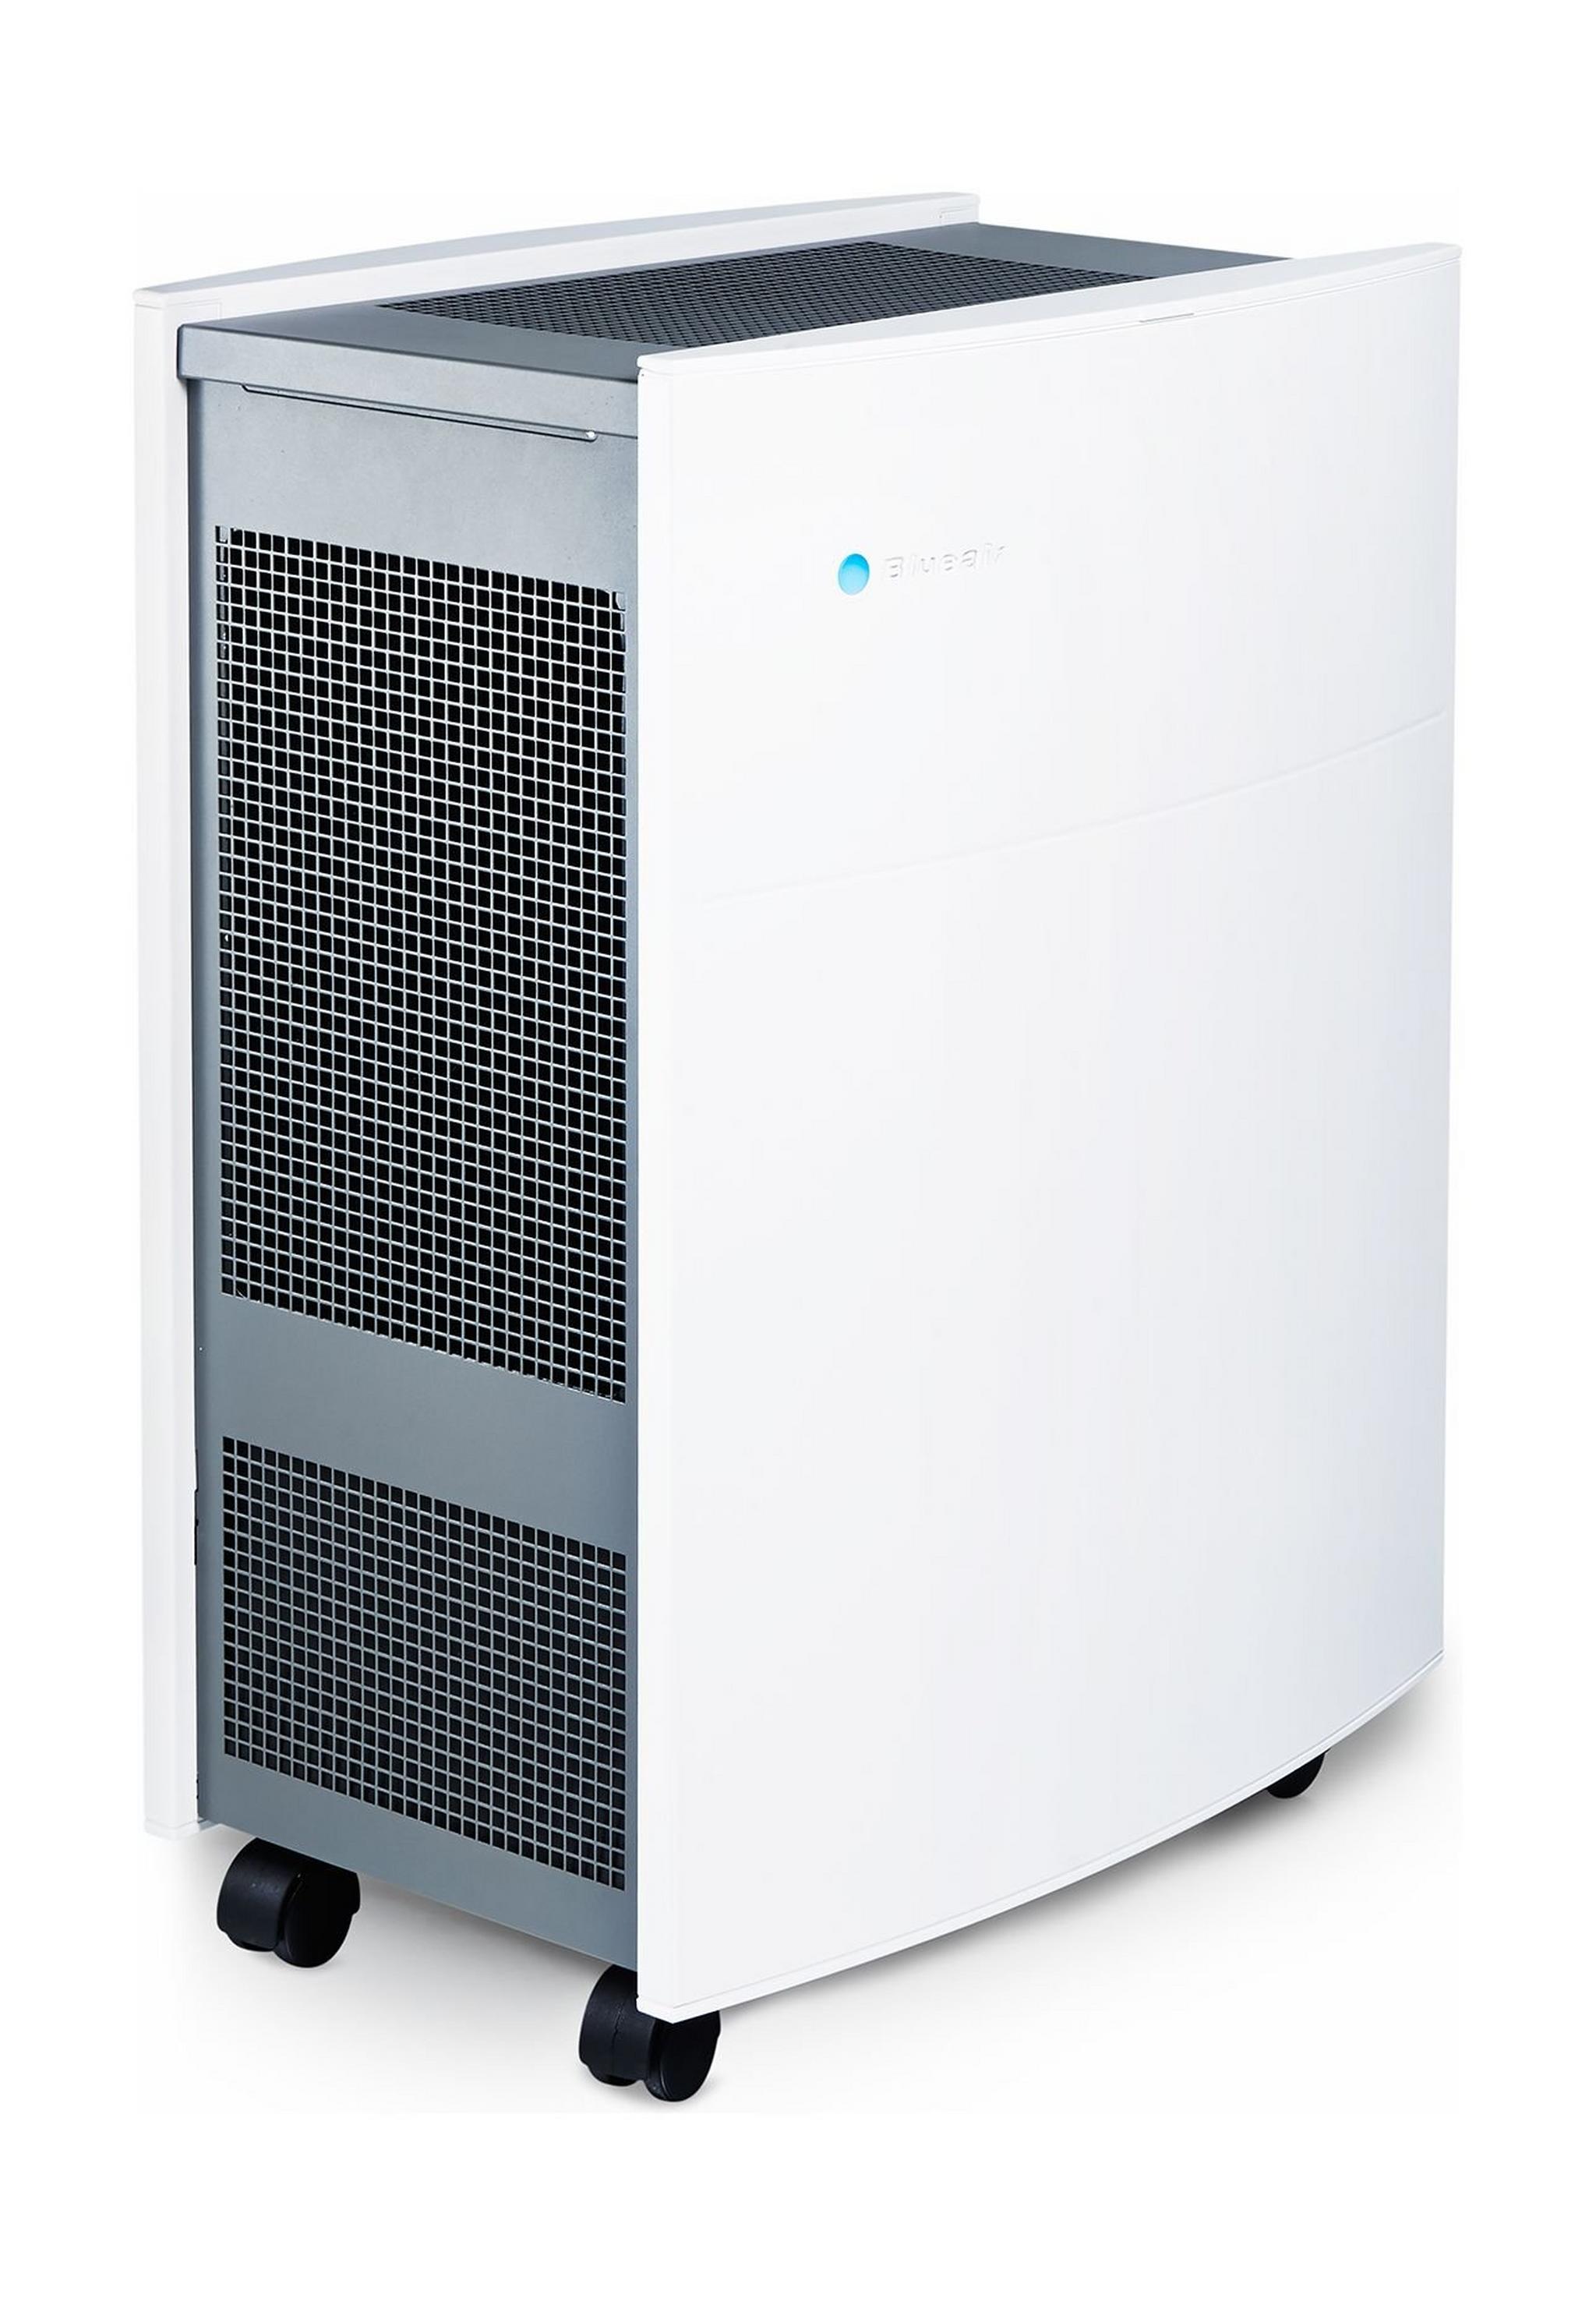 Blueair Classic Air Purifier With Wi-Fi Connection & Air Quality Control (680I)